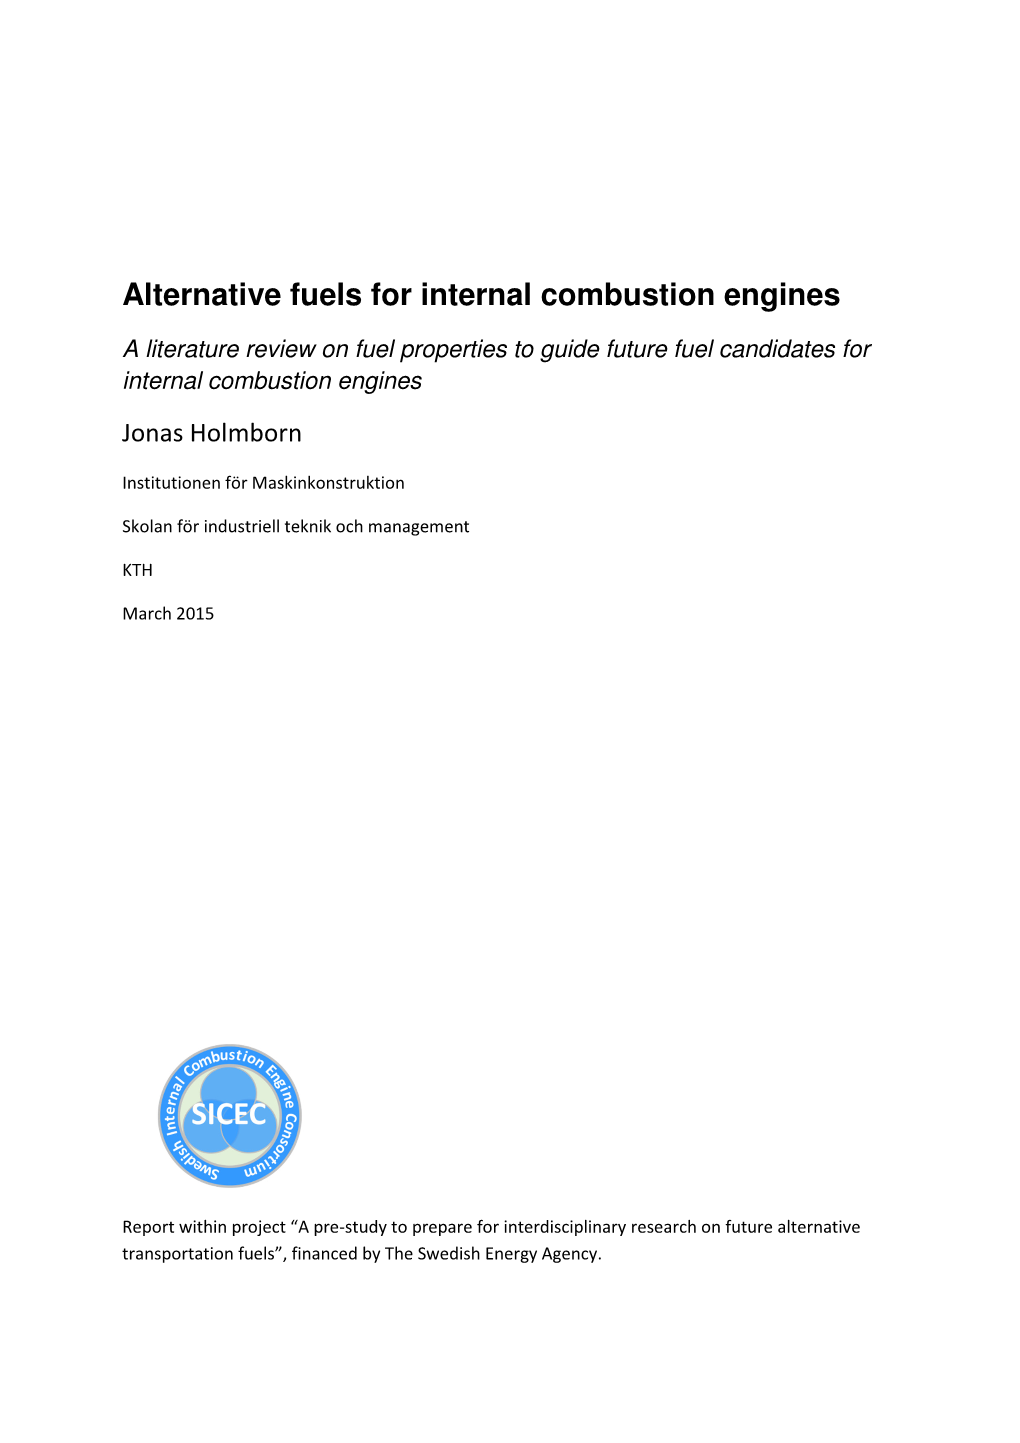 Alternative Fuels for Internal Combustion Engines